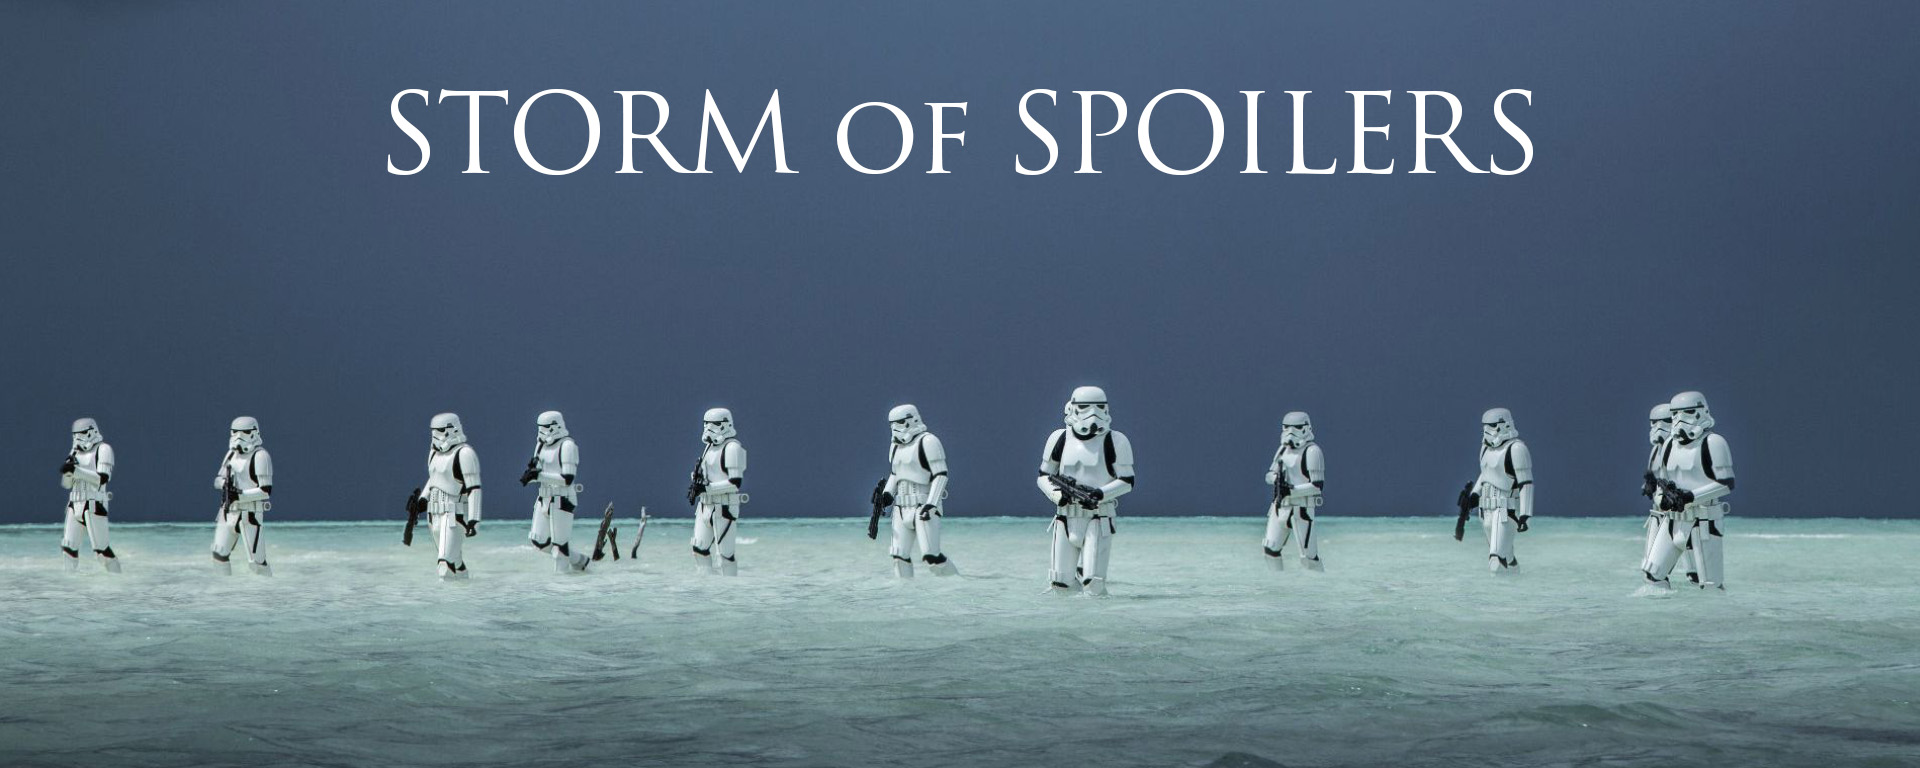 sos_rogueone_banner-1